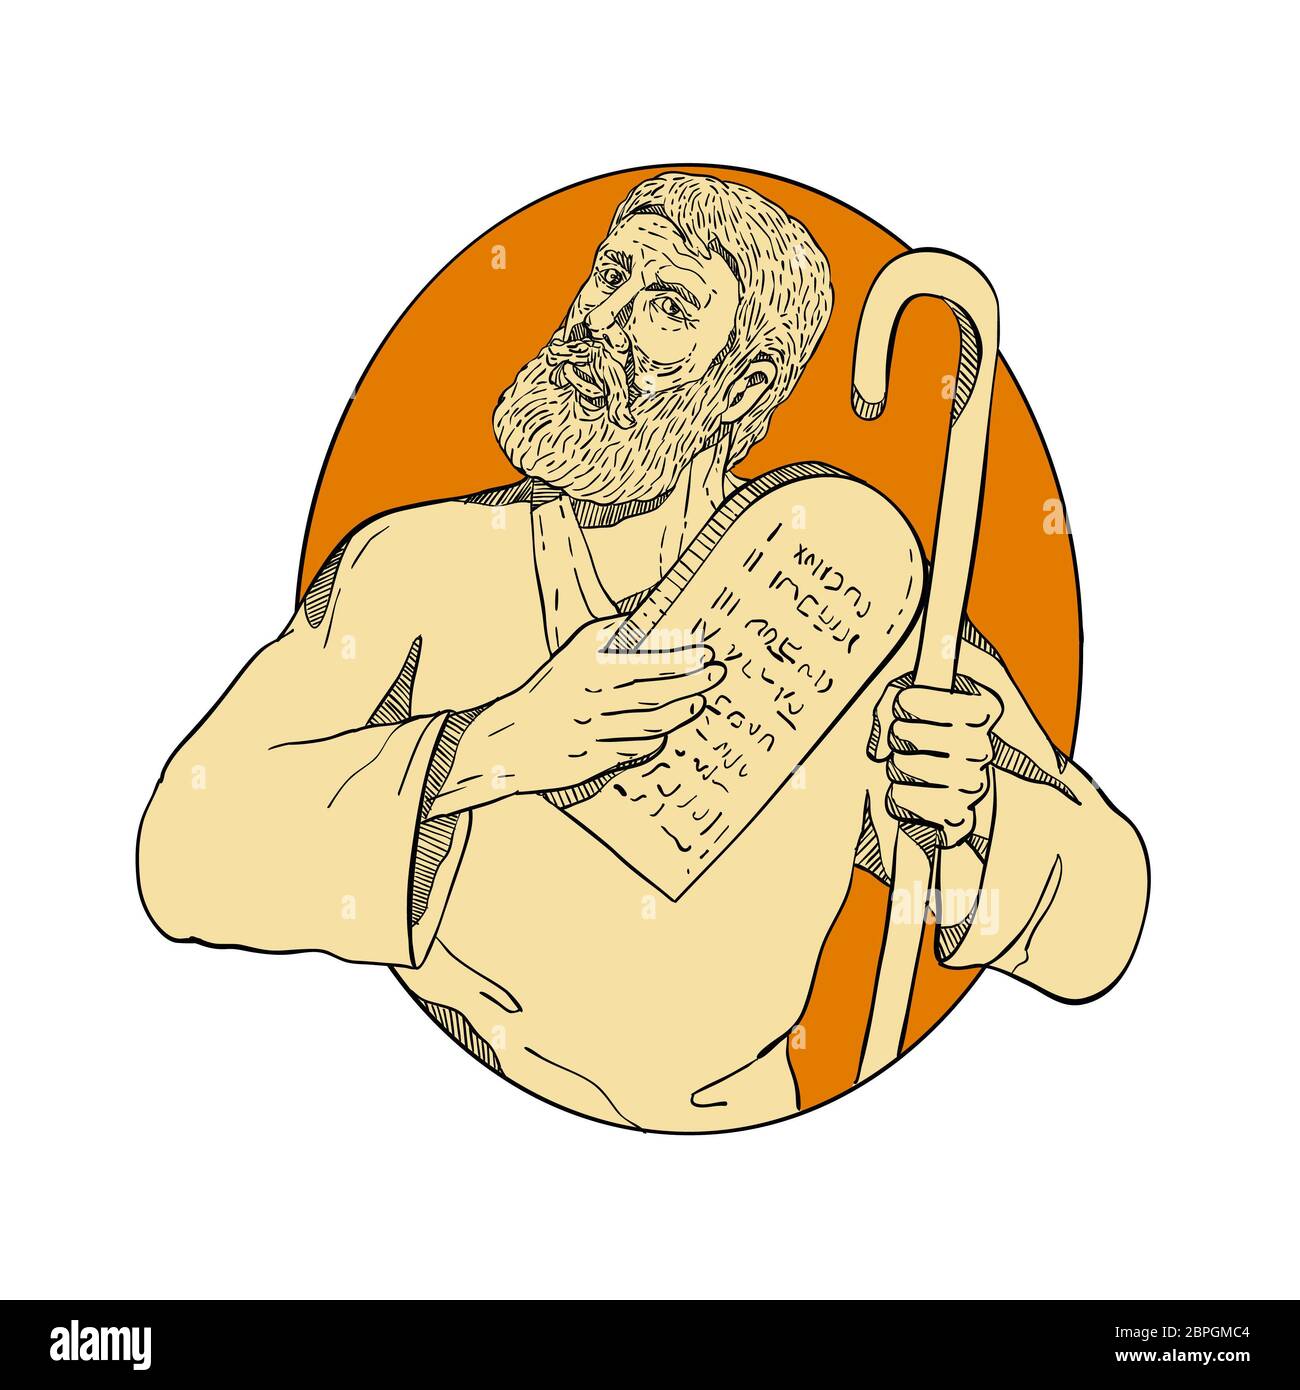 Drawing sketch style illustration of Moses, a prophet in the Abrahamic religions. leader of Israelites and lawgiver, with Ten Commandments set inside Stock Photo